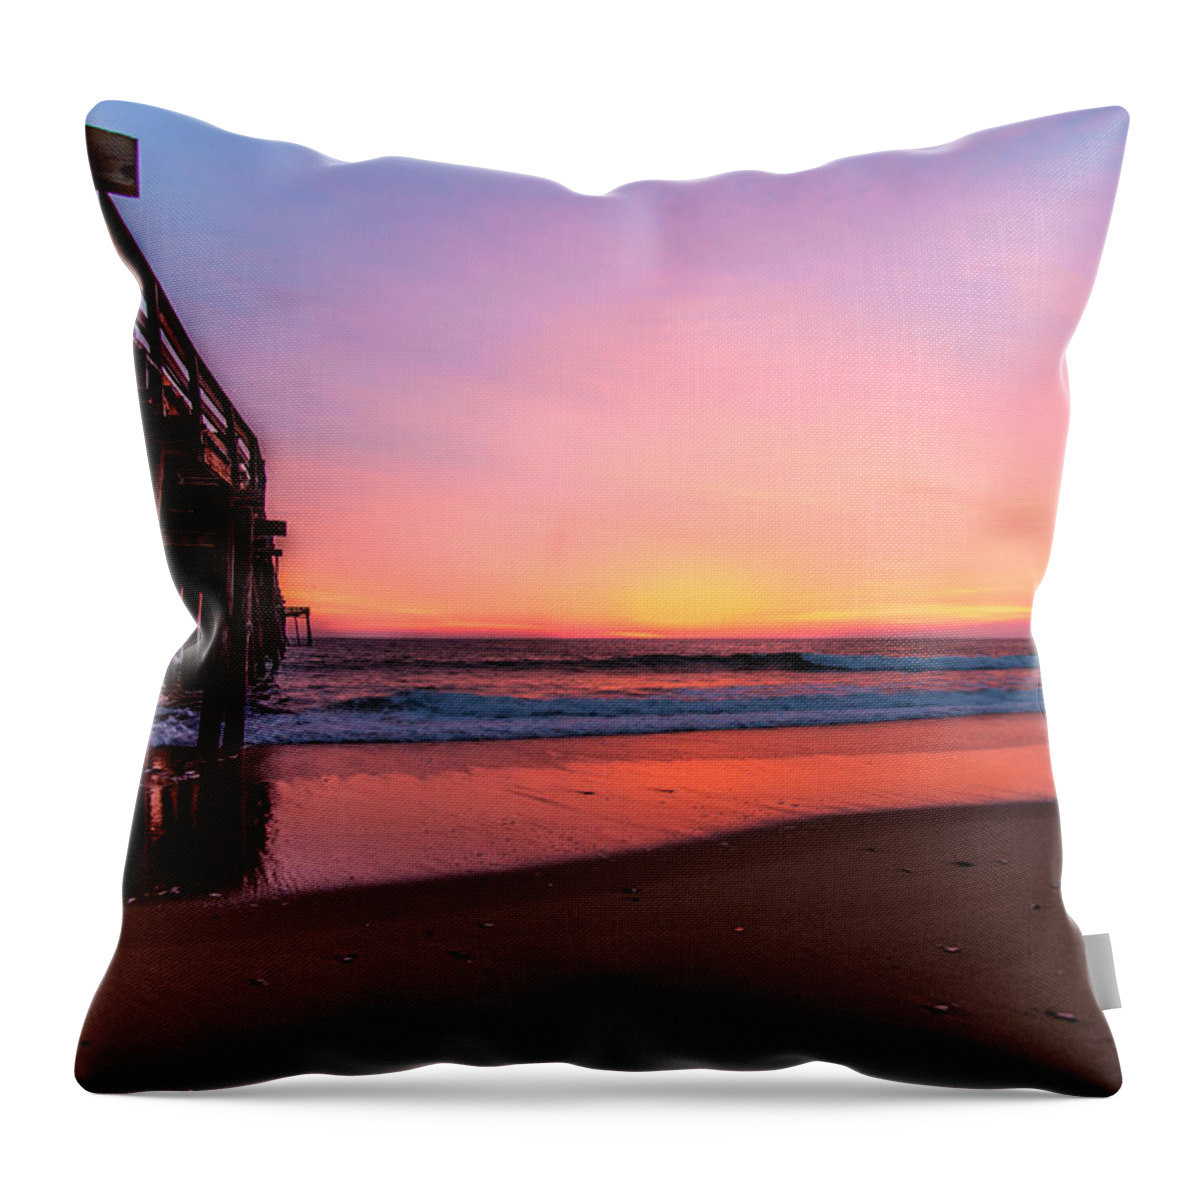 Sunrise Throw Pillow featuring the photograph Pink Pier by Stacy Abbott